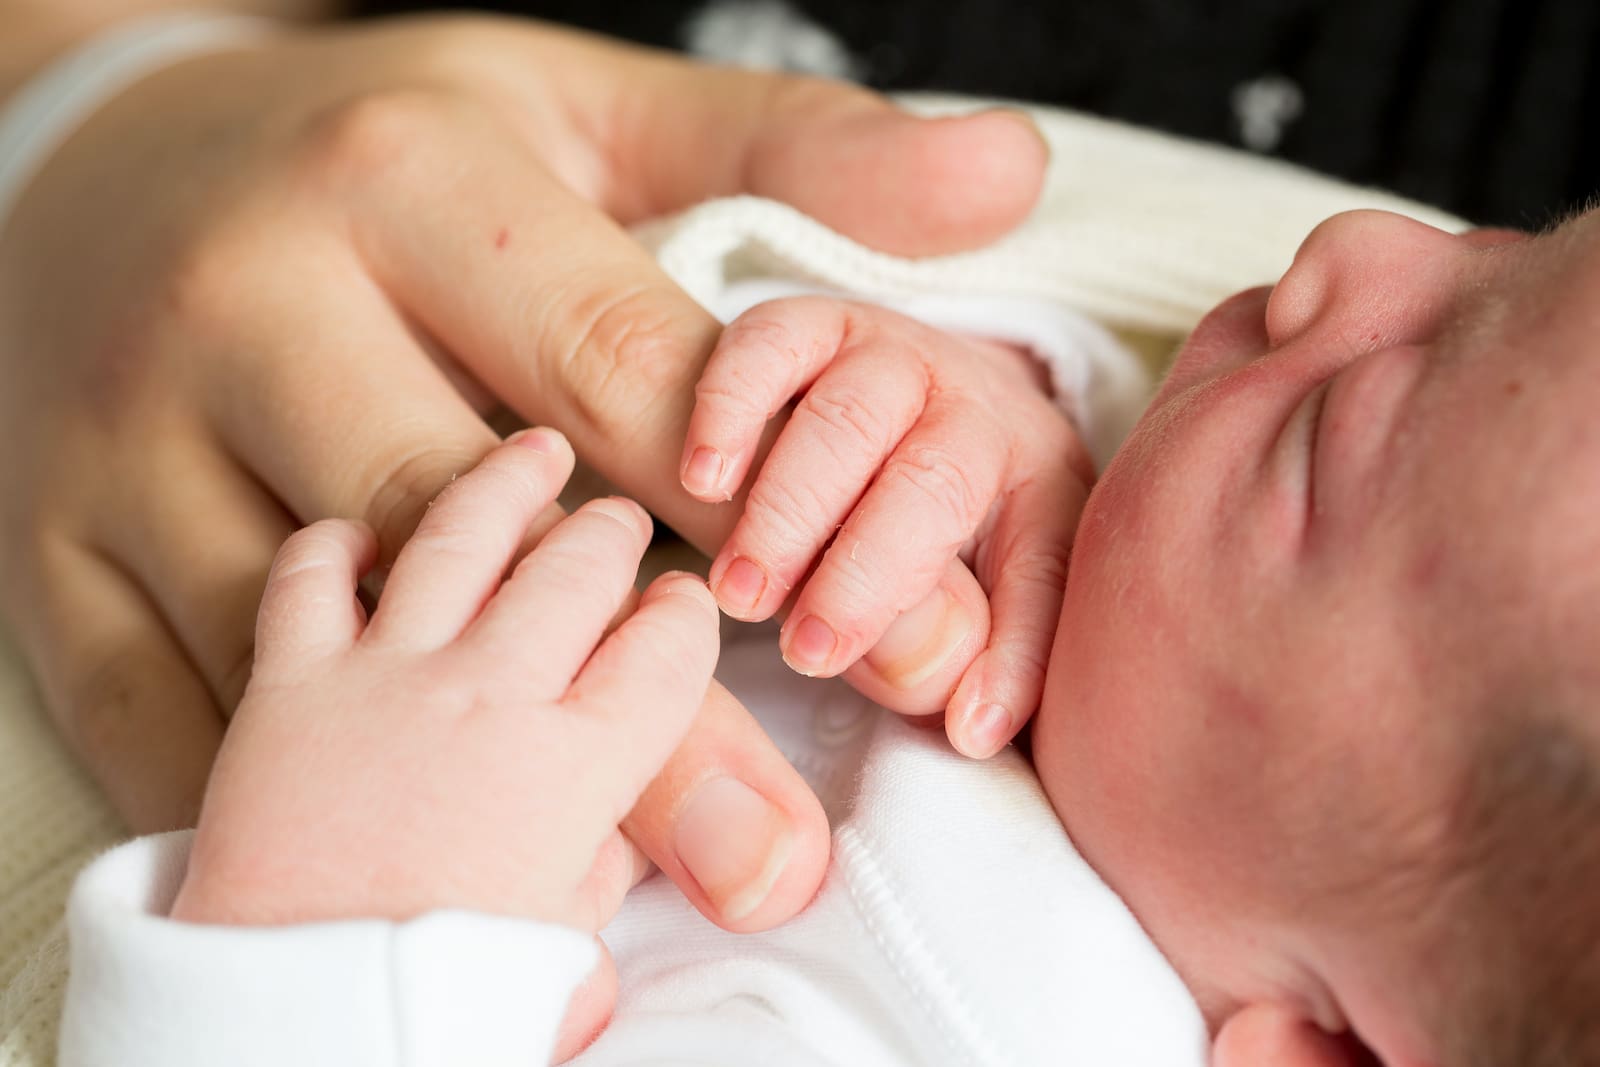 Image of a newborn baby holding an adult's hand.